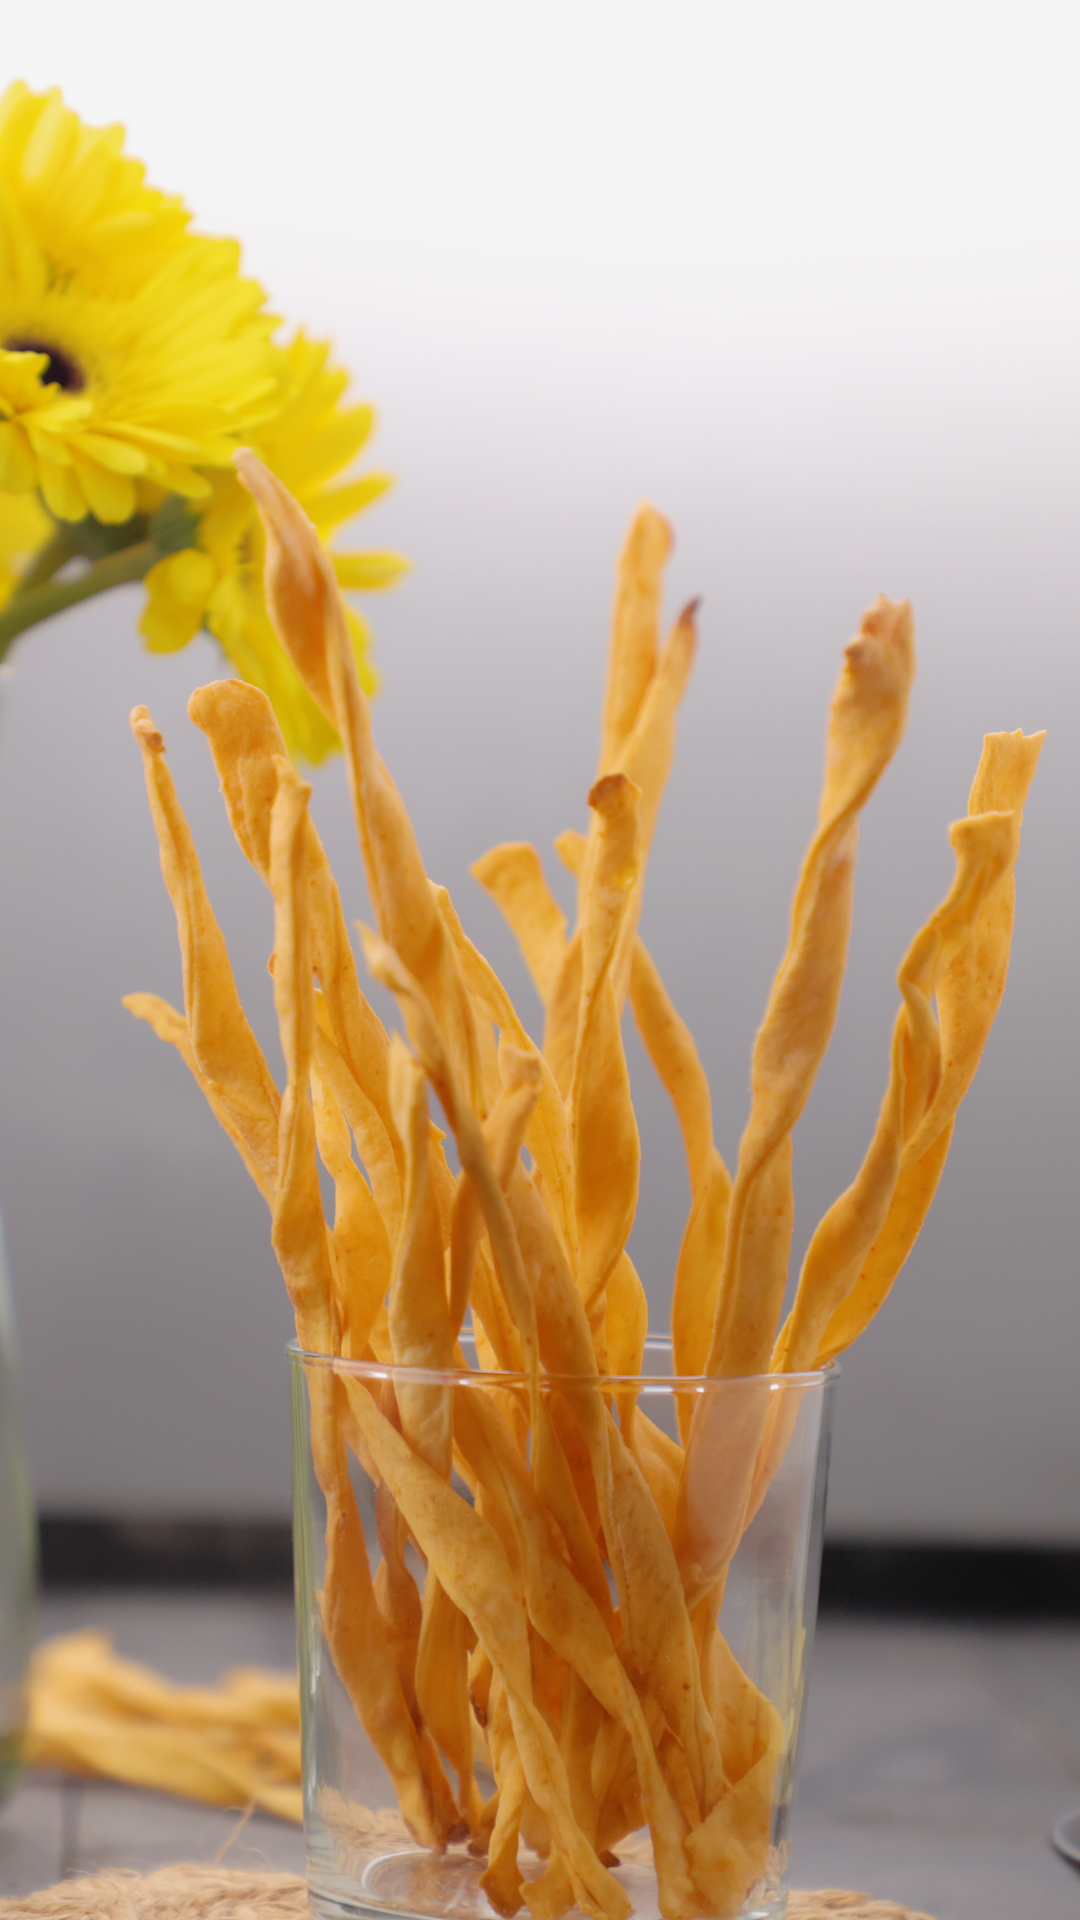 Indian Cheese Straws